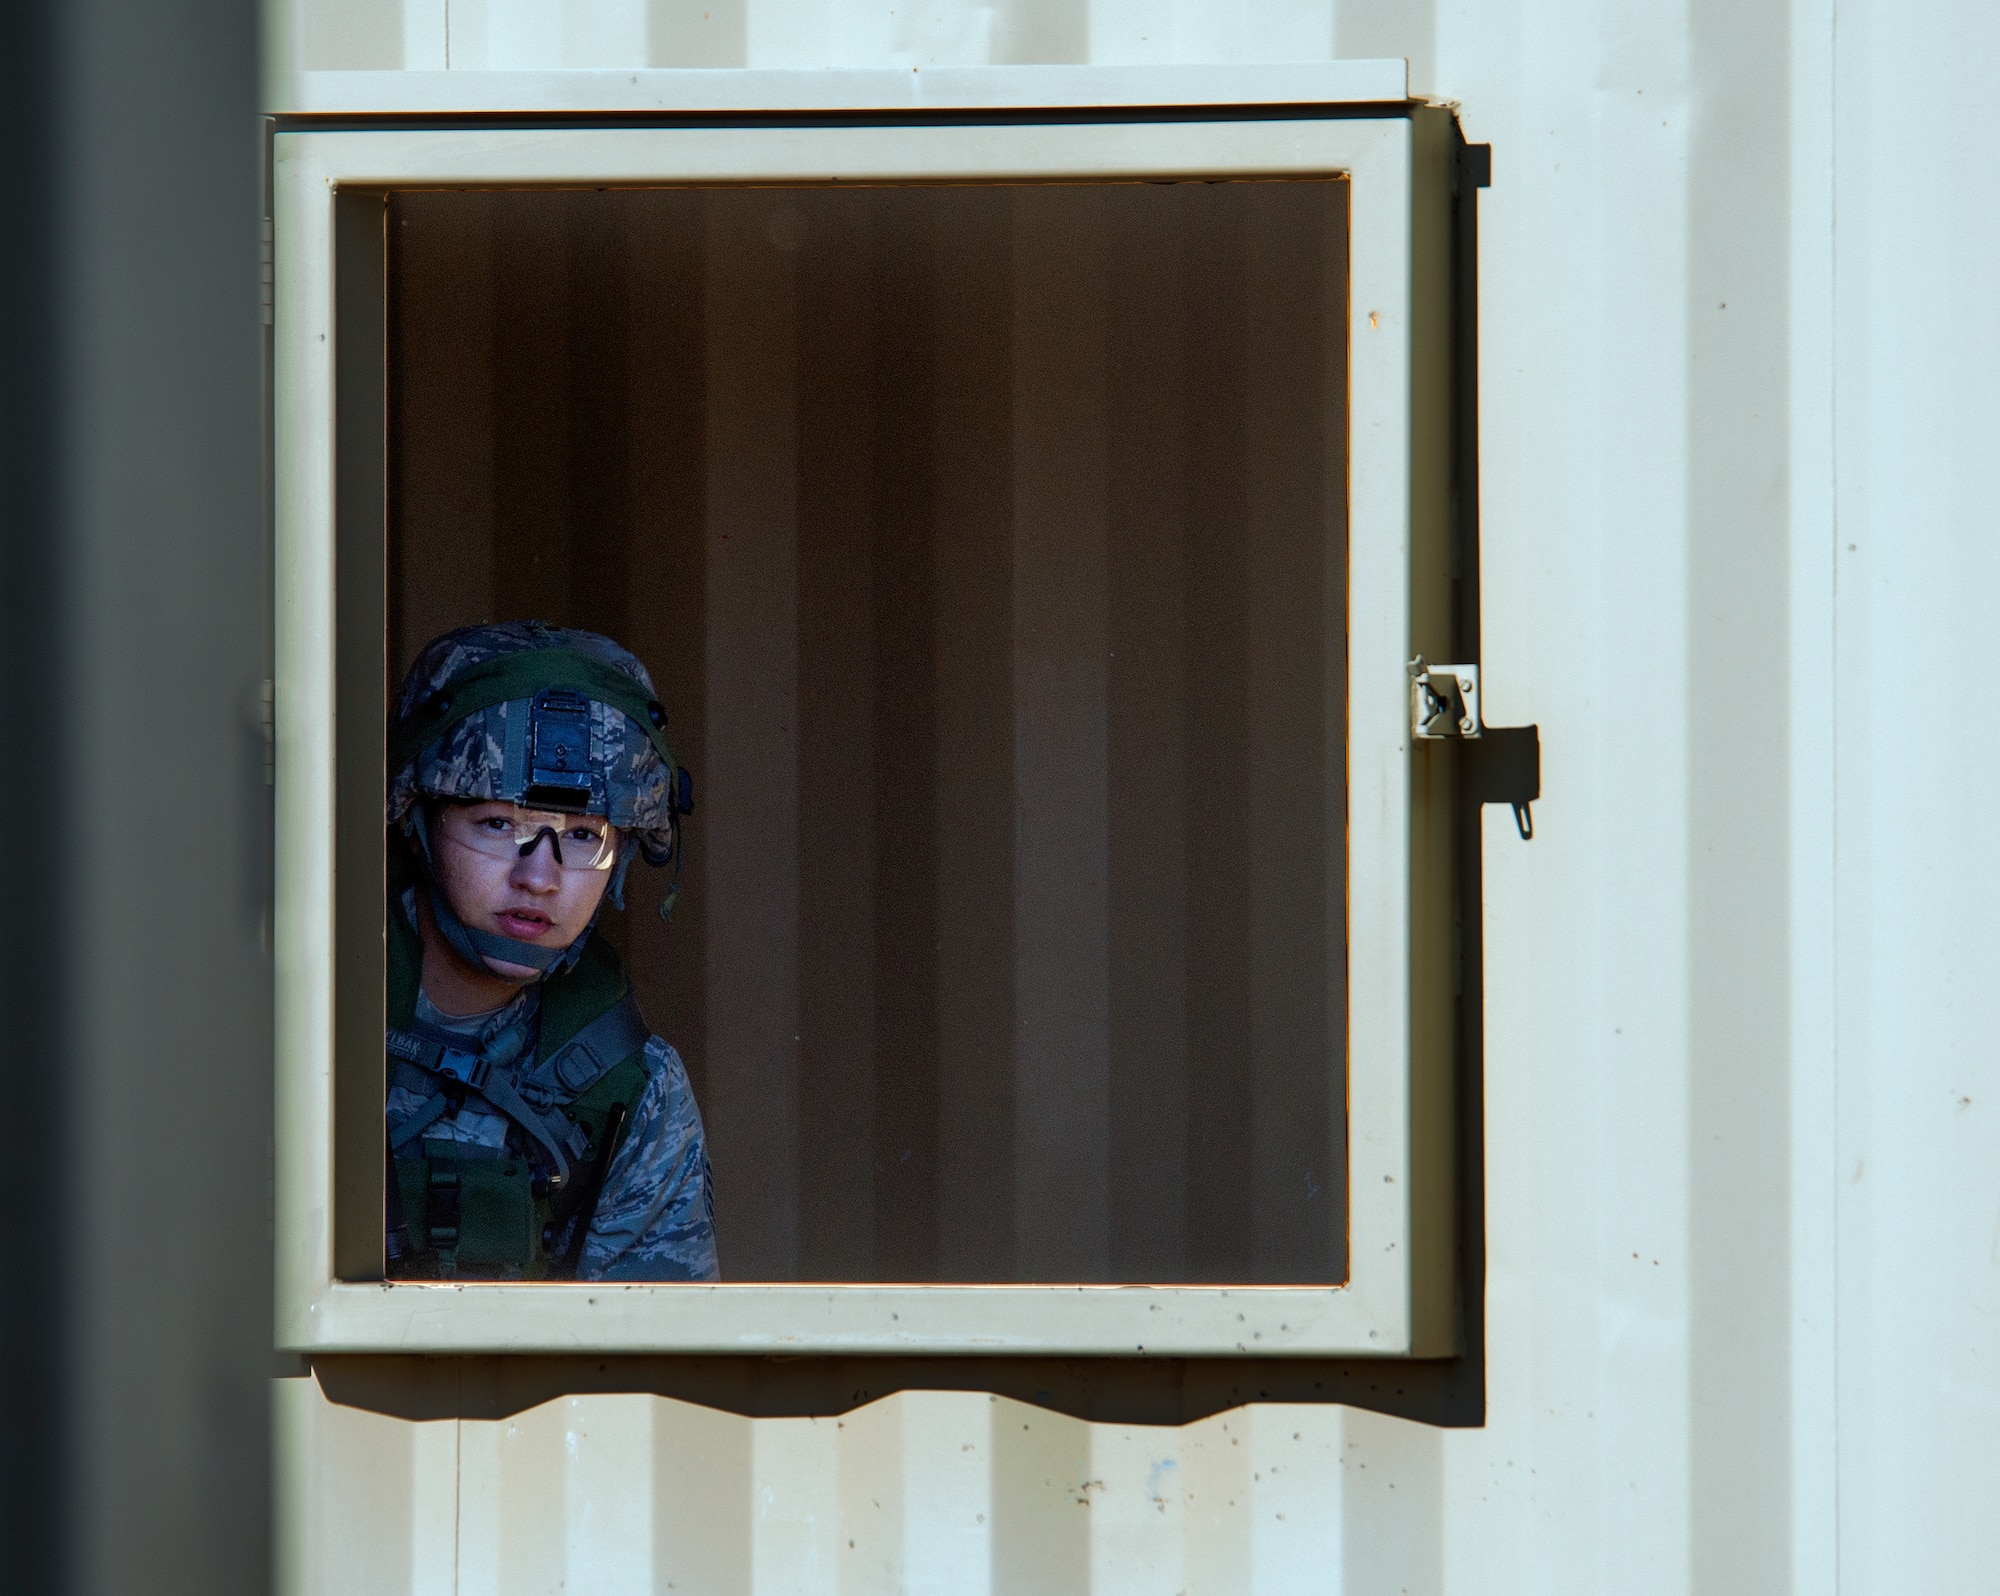 Staff Sgt. Amaris Serrano, 28th Bomb Wing, Ellsworth Air Force Base, S.D., looks out a window Sept. 24, 2015, during the tactical recapture portion of the 2015 Global Strike Challenge security forces competition on Camp Guernsey, Wyo. Airmen used windows as vantage points to survey locations before moving through an enemy occupied town. (U.S. Air Force photo by Senior Airman Brandon Valle)